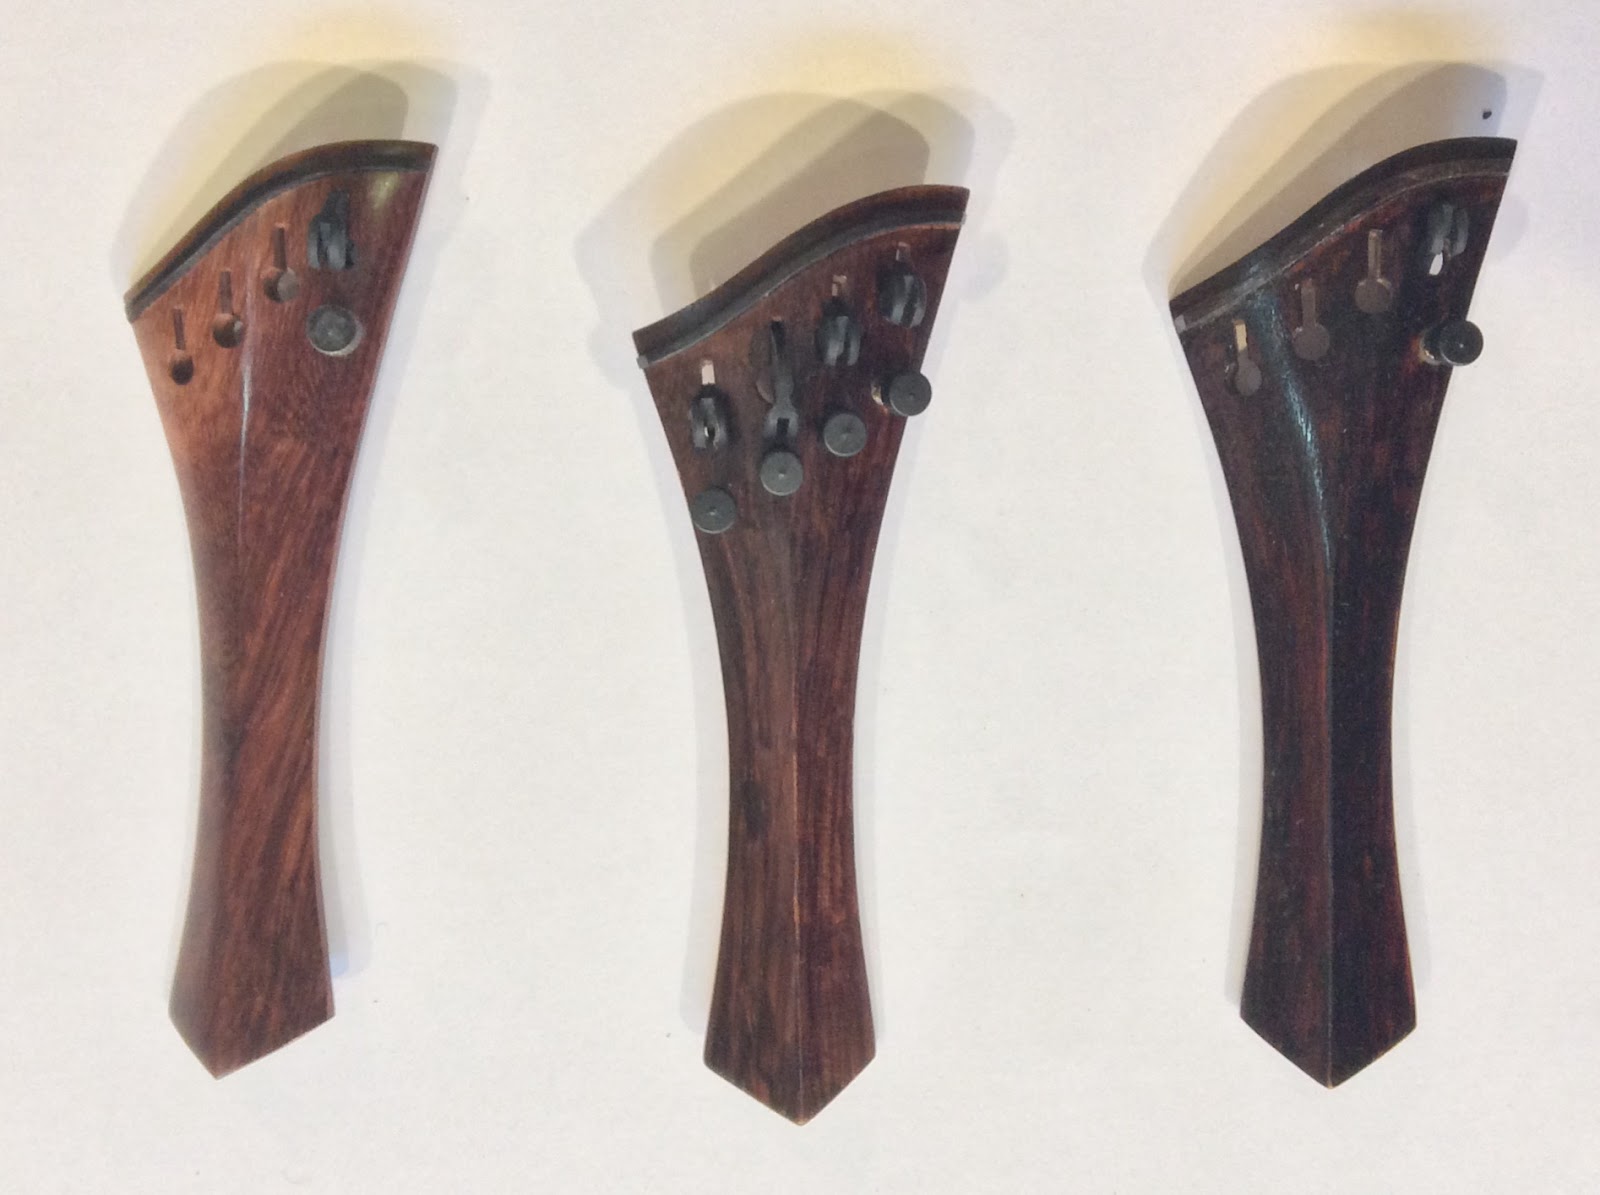 Read more about the article Violin Tailpiece: Importance of Choosing the Right One